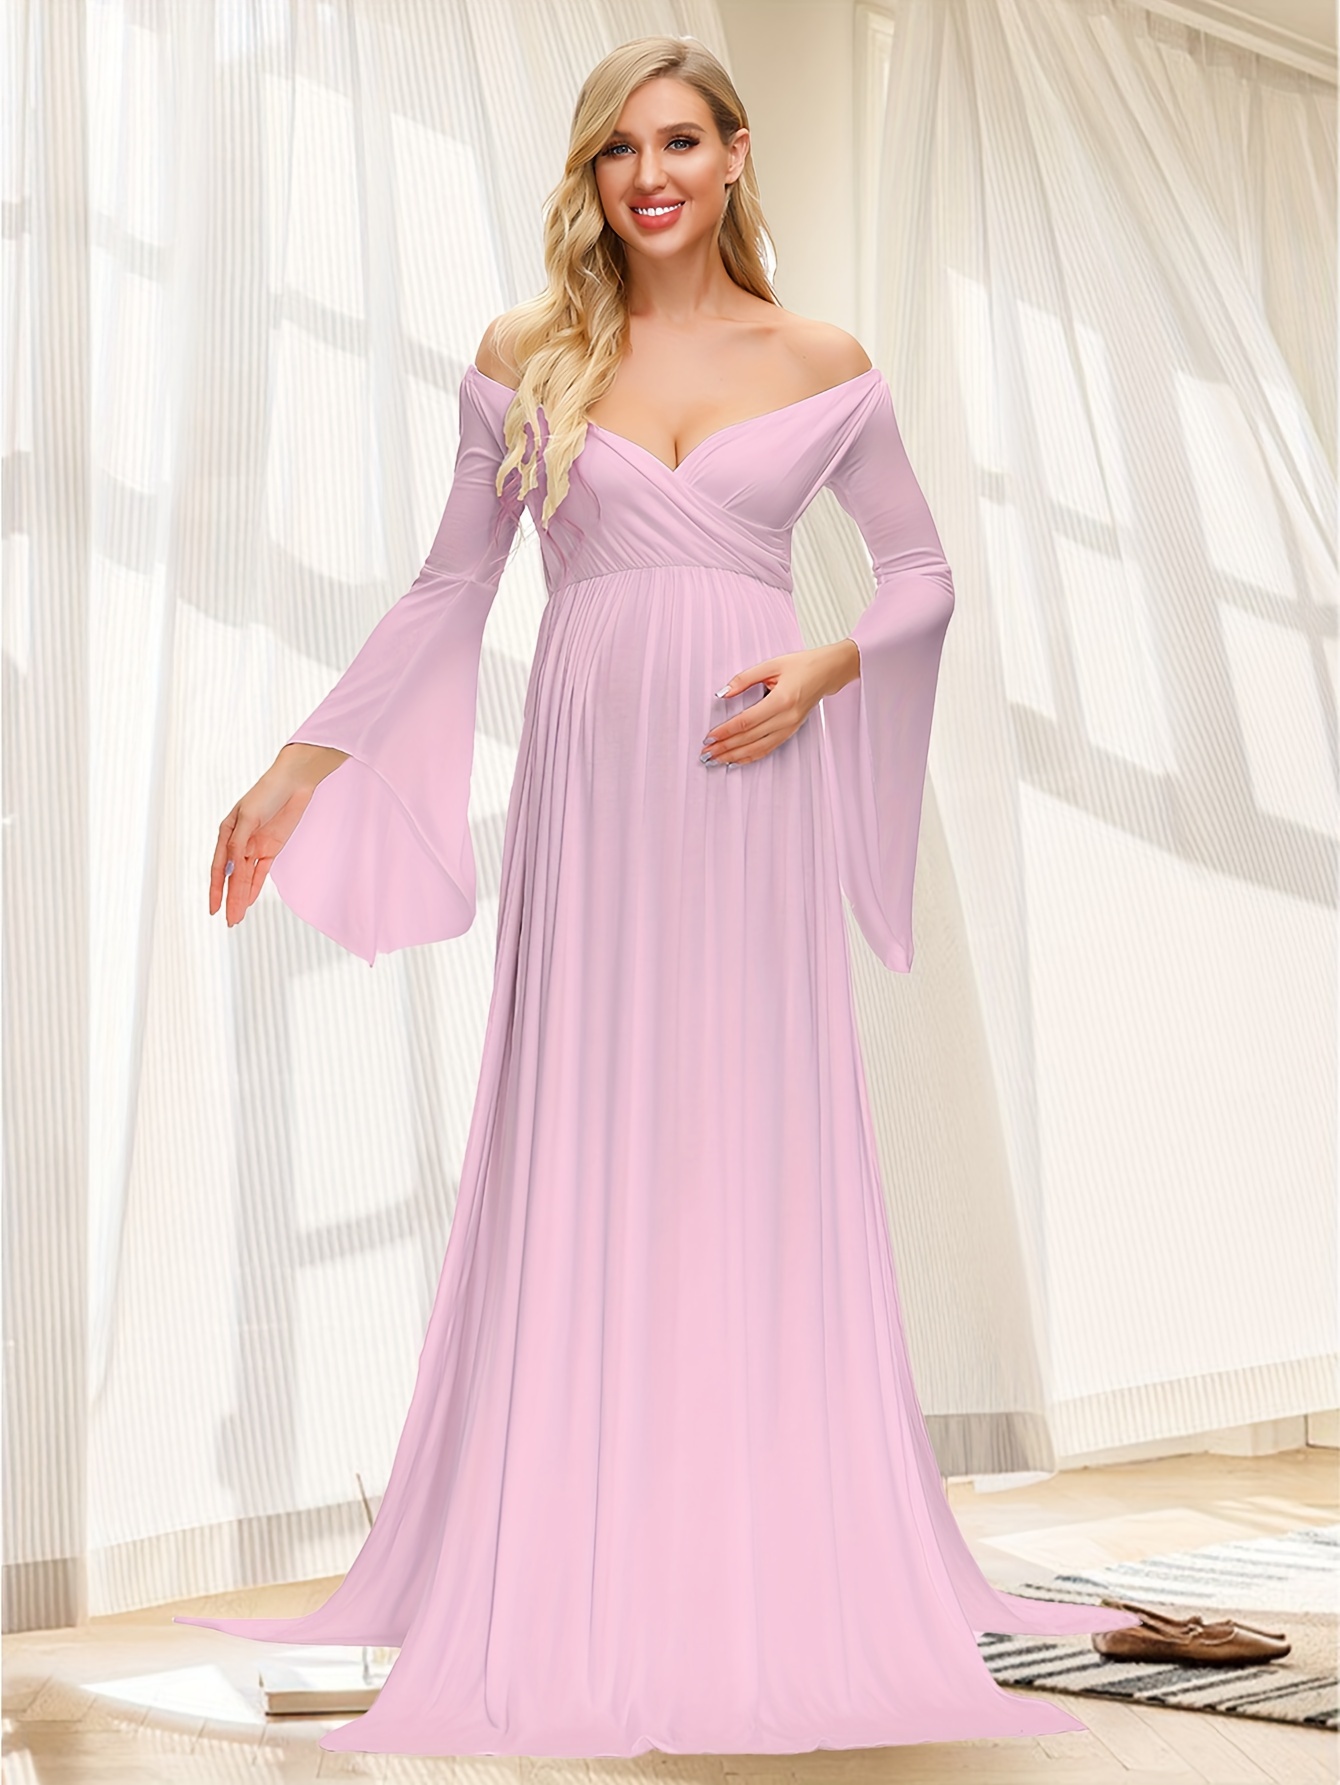 gvdentm Maternity Dresses V Neck Bridesmaid Dresses for Women Long Chiffon  Prom Evening Gowns with Pockets 